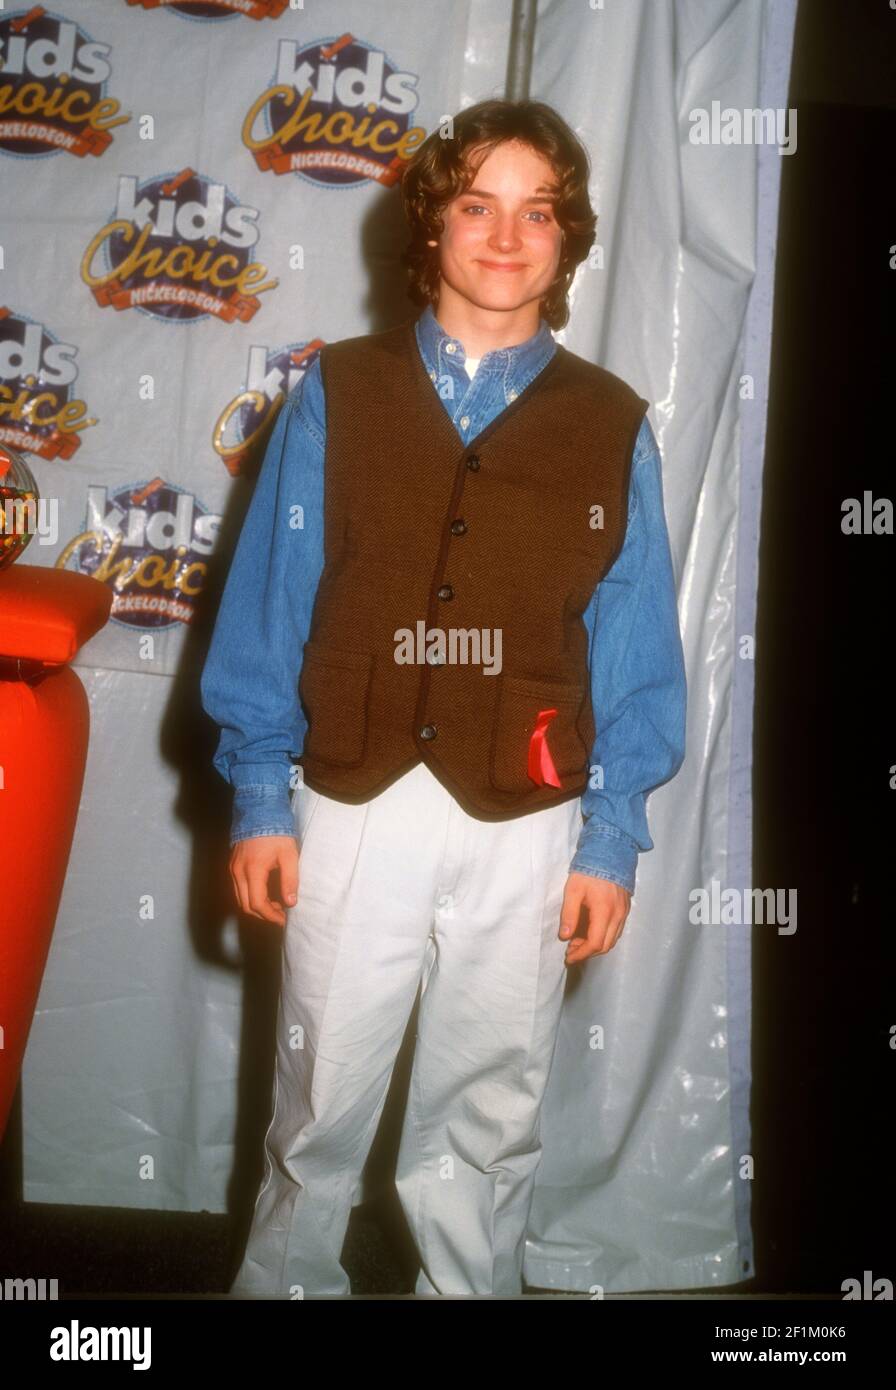 Universal City, California, USA 11th May 1996 Actor Elijah Wood attends the Ninth Annual Nickelodeon's Kids' Choice Awards on May 11, 1996 at Universal Studios in Universal City, California, USA. Photo by Barry King/Alamy Stock Photo Stock Photo